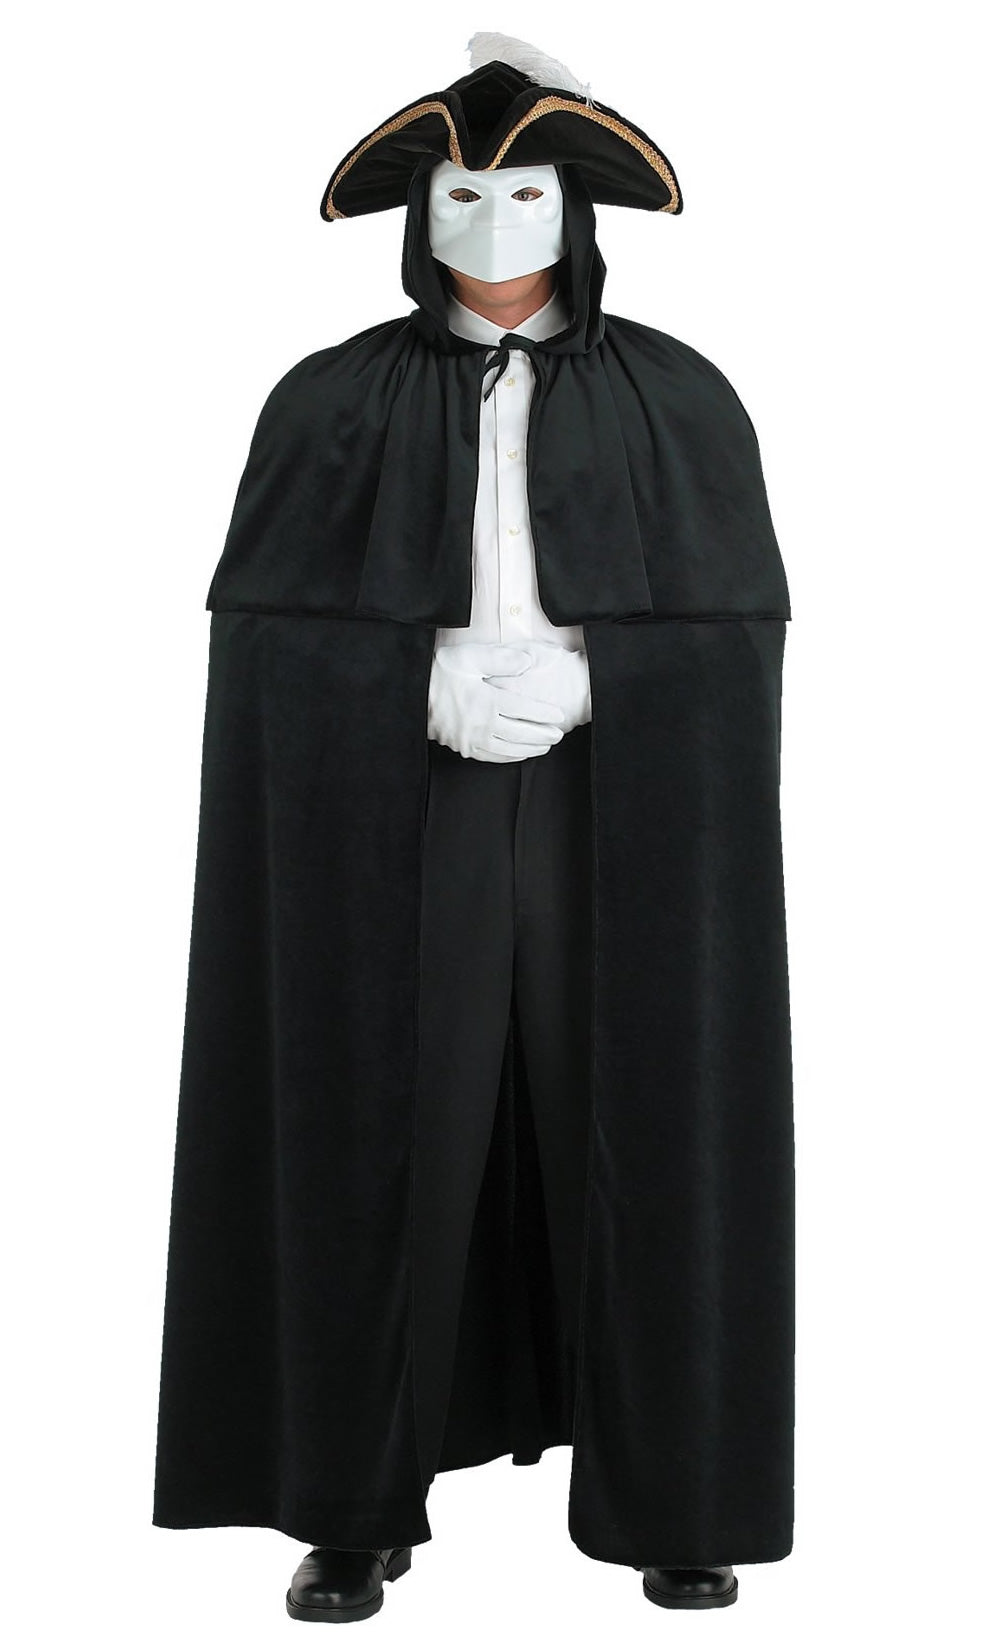 Phantom of Venice costume with mask, hat, glove and cape